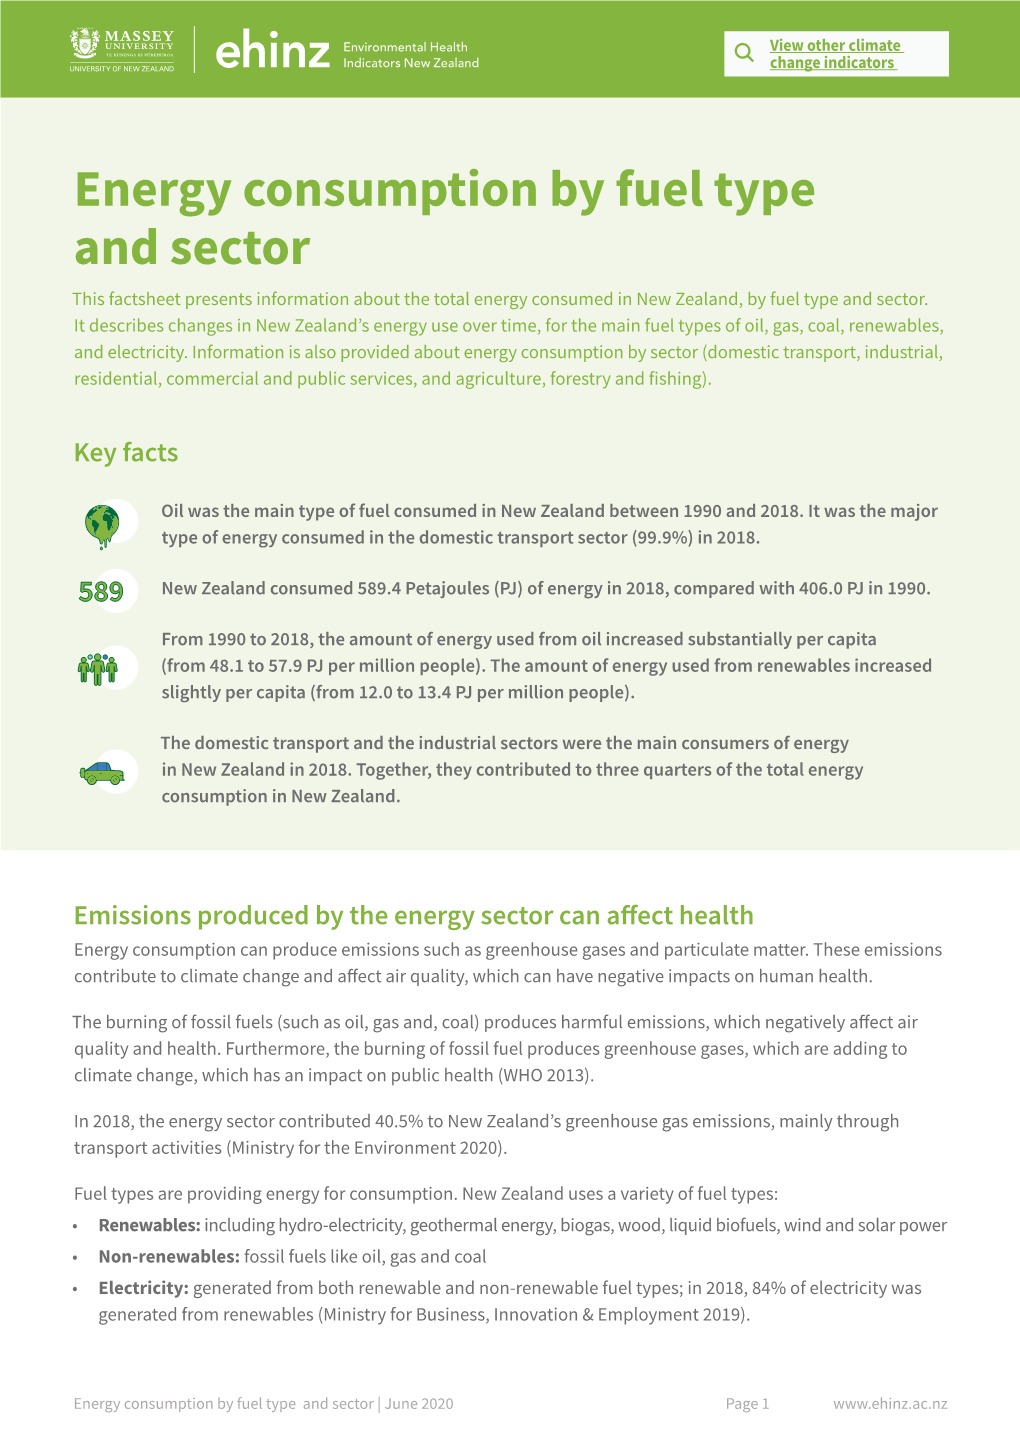 Energy Consumption by Fuel Type and Sector This Factsheet Presents Information About the Total Energy Consumed in New Zealand, by Fuel Type and Sector